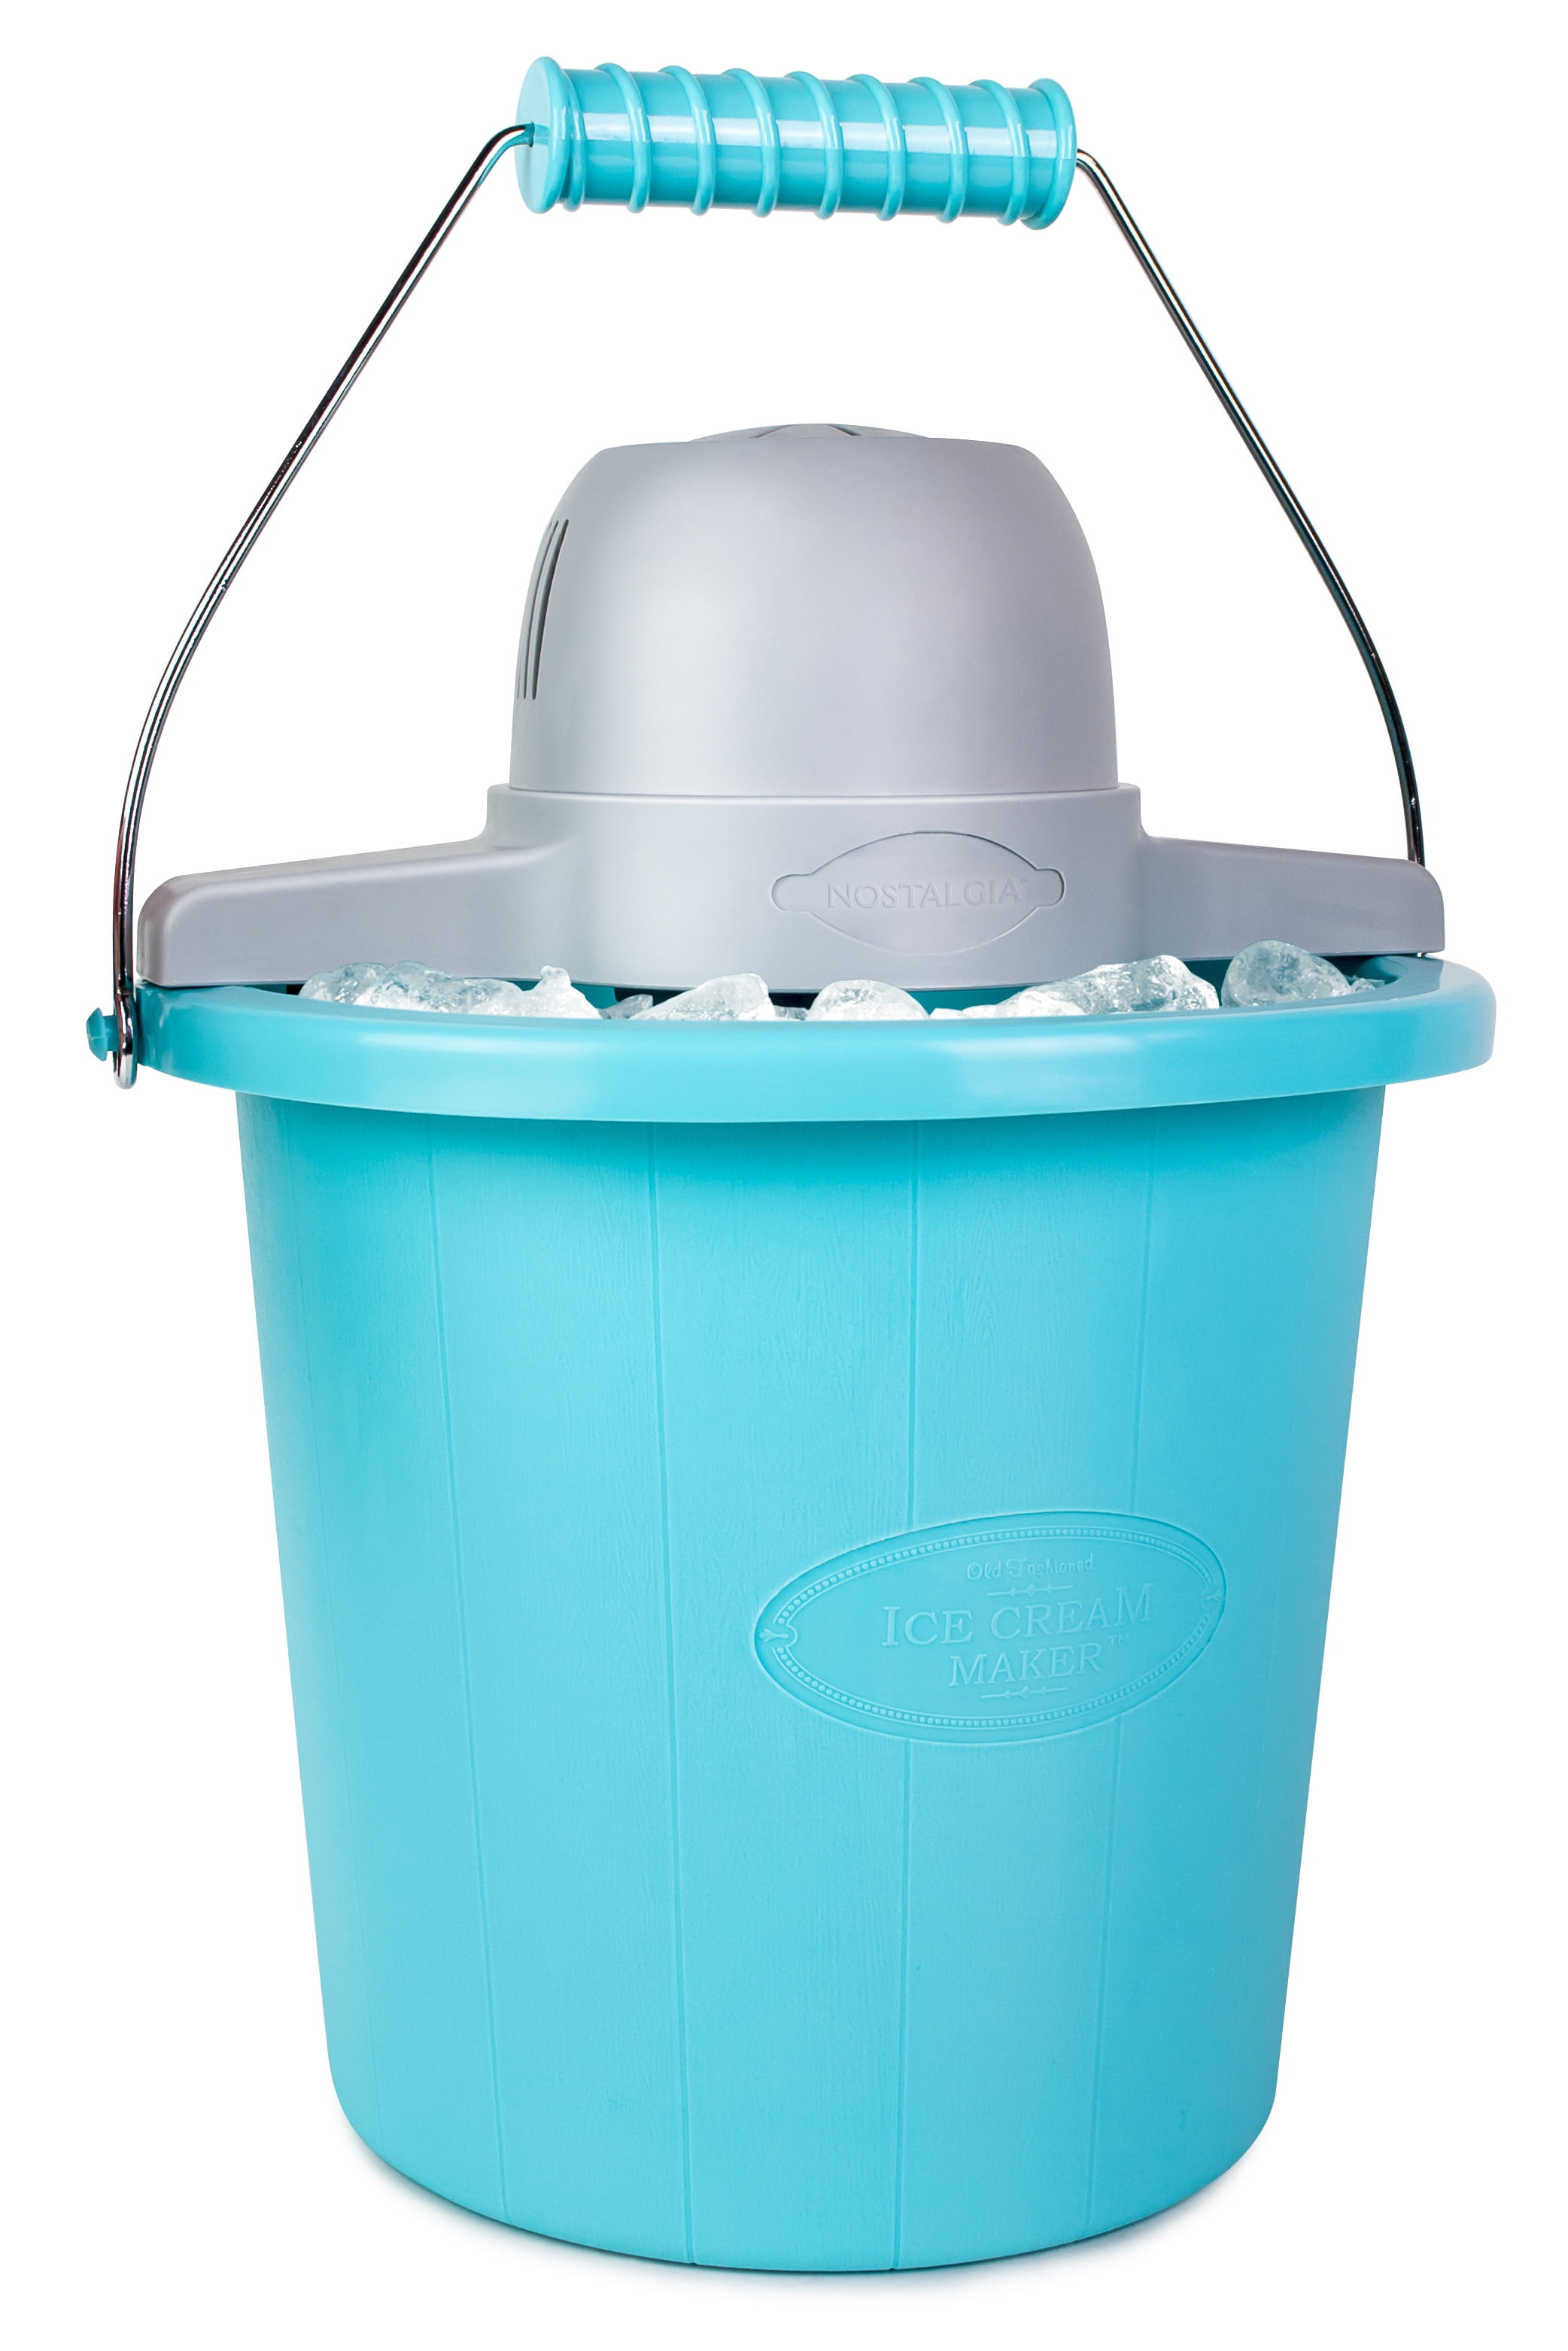 Nostalgia 4 qt. Electric Ice Cream Maker with Easy-Carry Handle, Blue